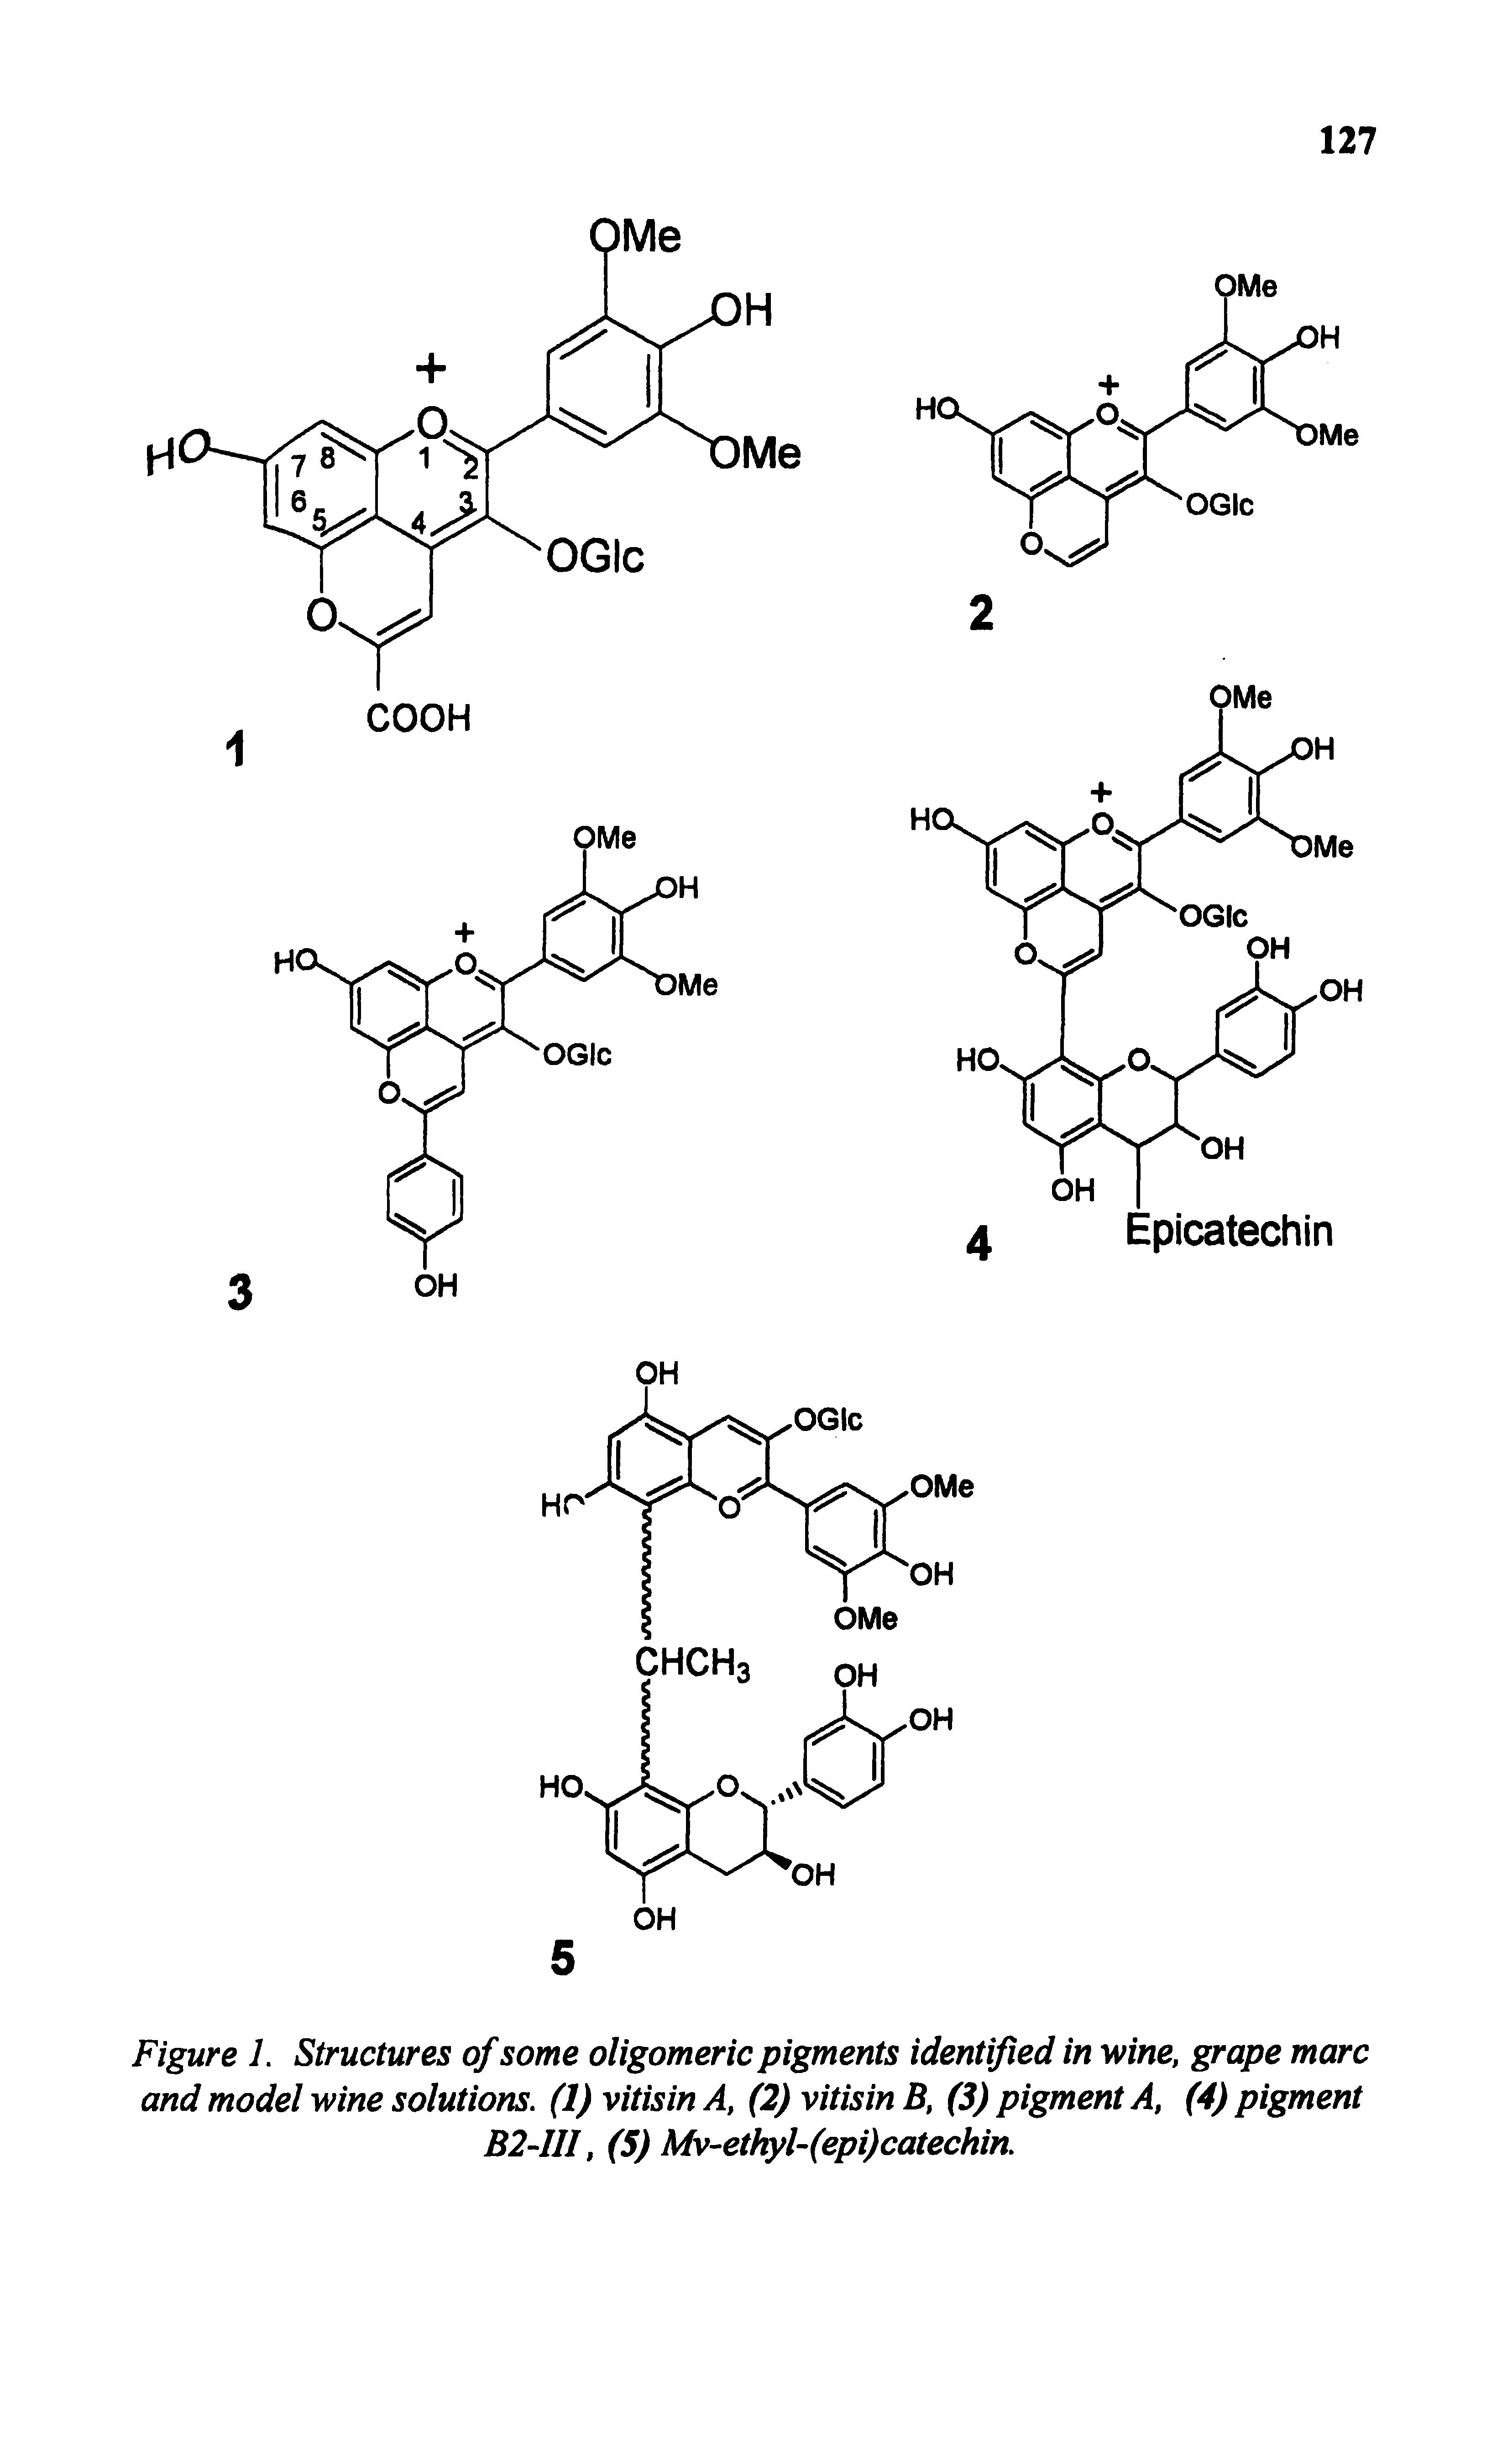 Figure 1. Structures of some oligomeric pigments identified in wine, grape marc and model wine solutions. (1) vitisin A, (2) vitisin B, (3) pigment A, (4) pigment B2-1H, (5) Mv-ethyl-(epi)catechin.